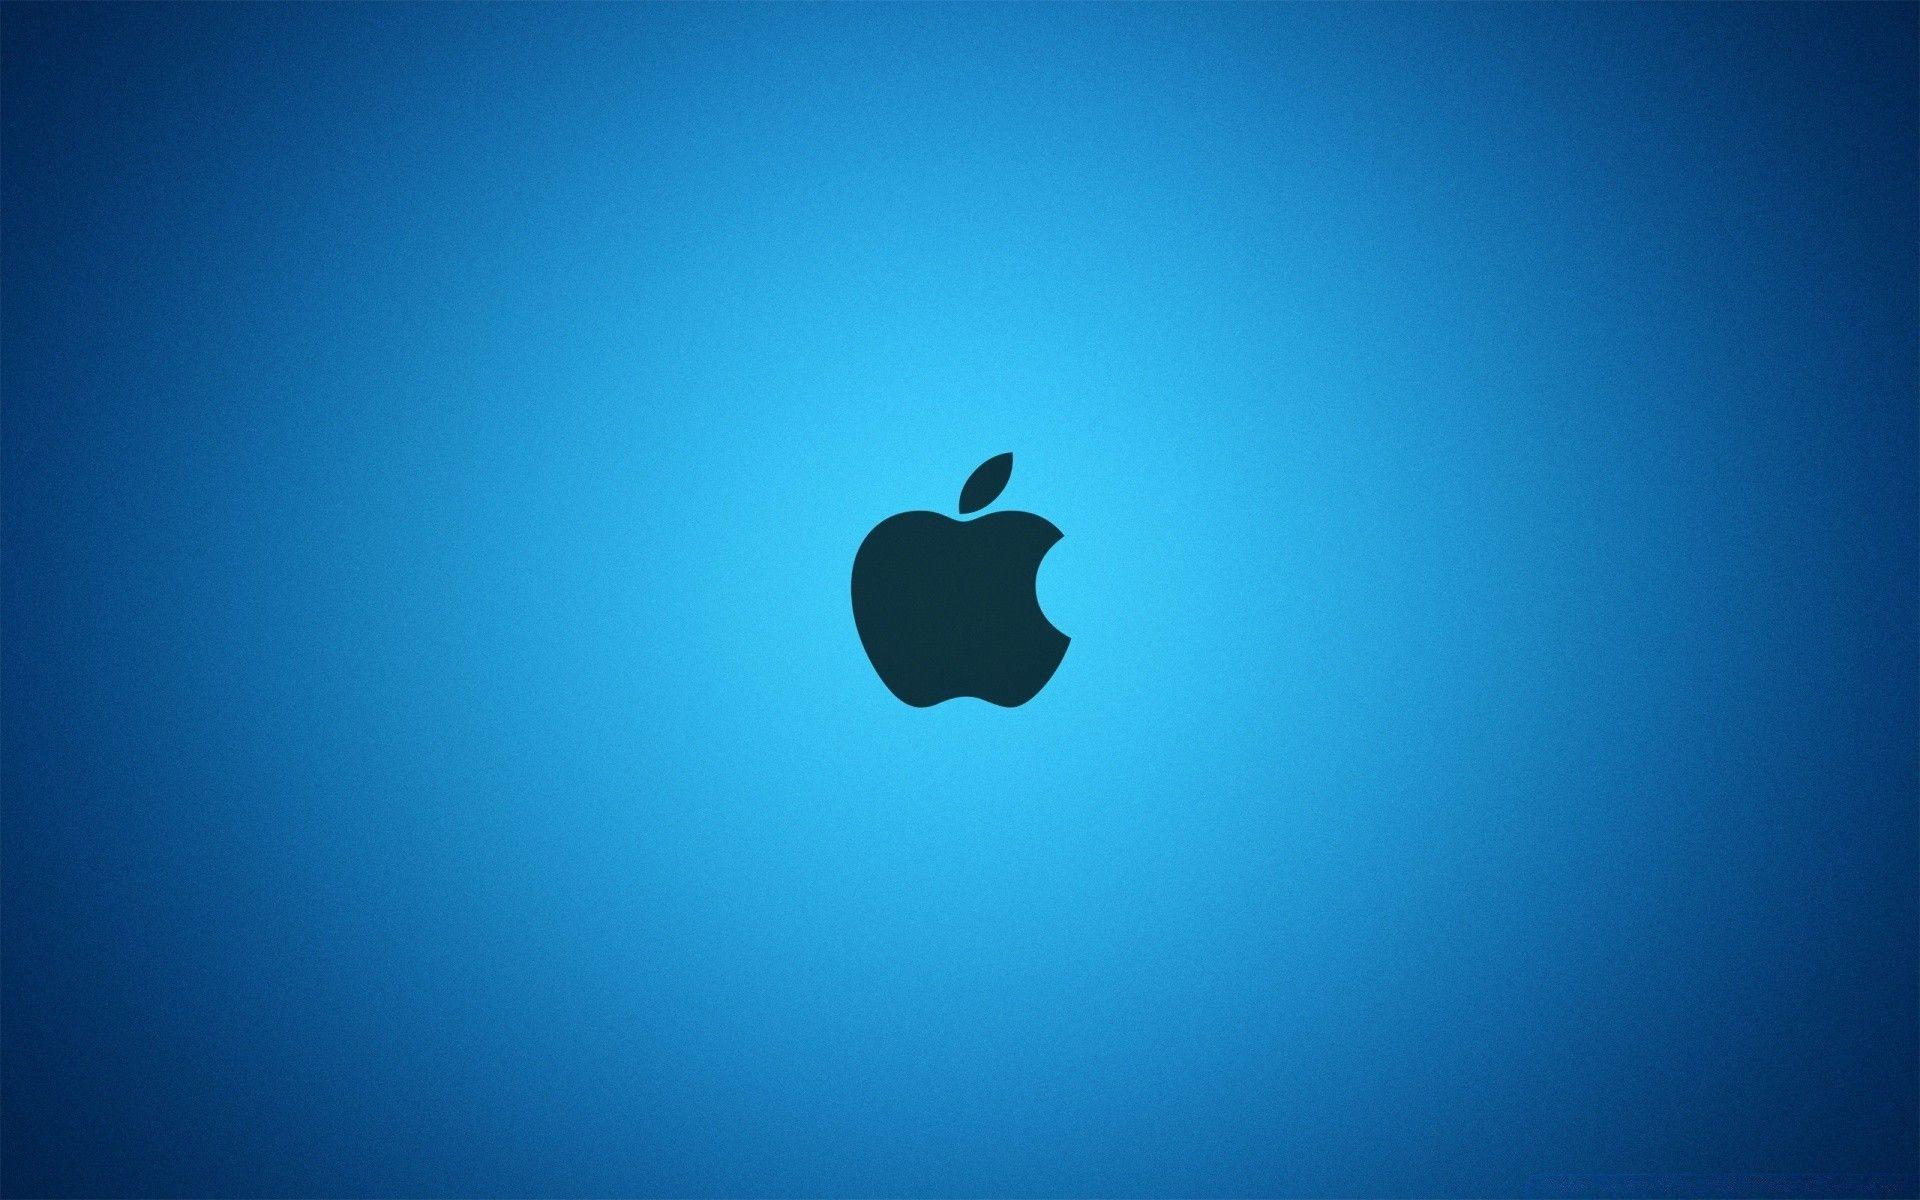 iPhoneXpapers.com | iPhone X wallpaper | at08-apple-logo-water-white-blue -art-illustration